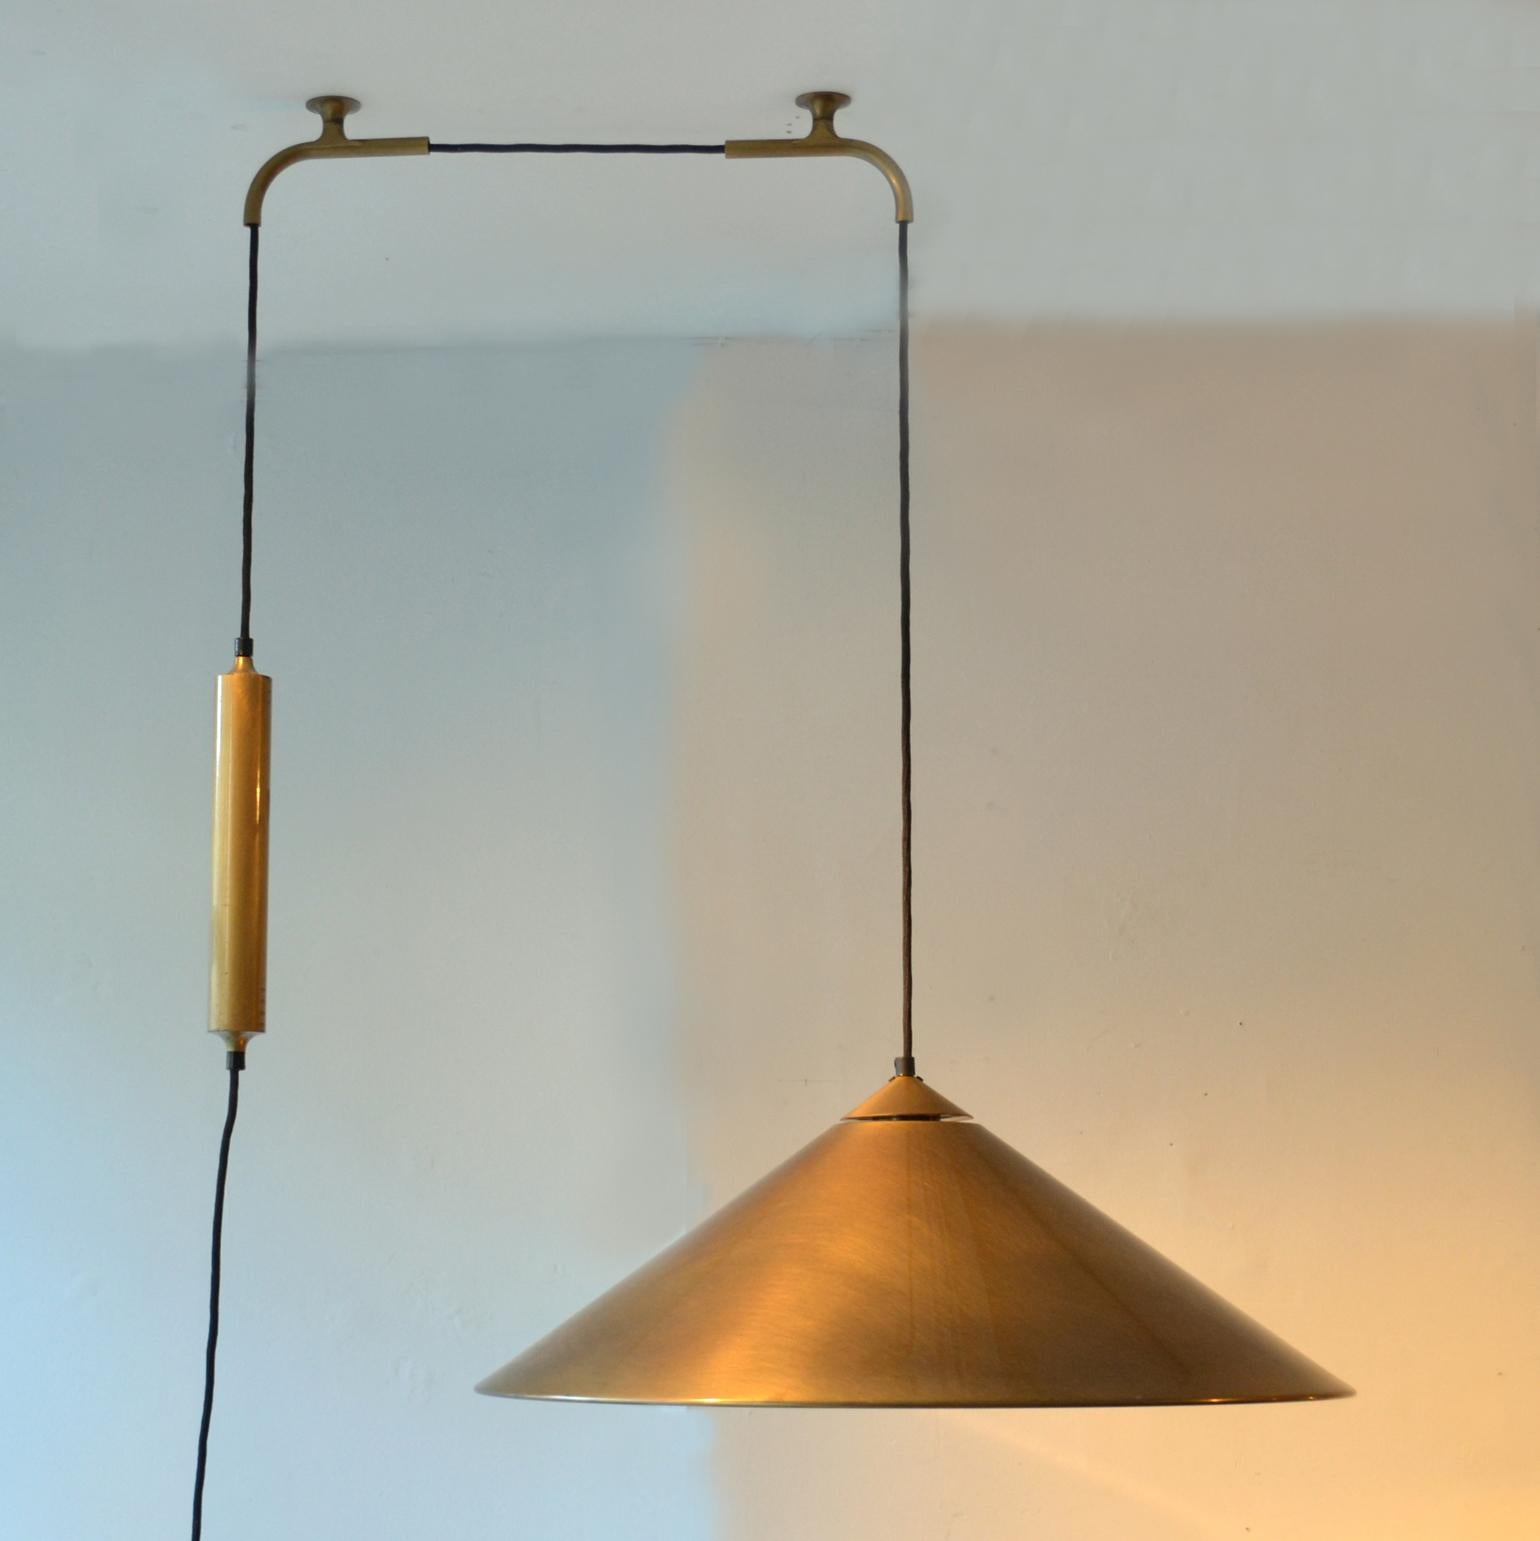 Counterbalance pendant 'Keos' by Florian Schulz with rare elongated side weight. Strong and minimal pendant in a high quality brass moves smoothly up and down due to the solid brass counterweight. The brass has a brushed bronze patina and is coated.